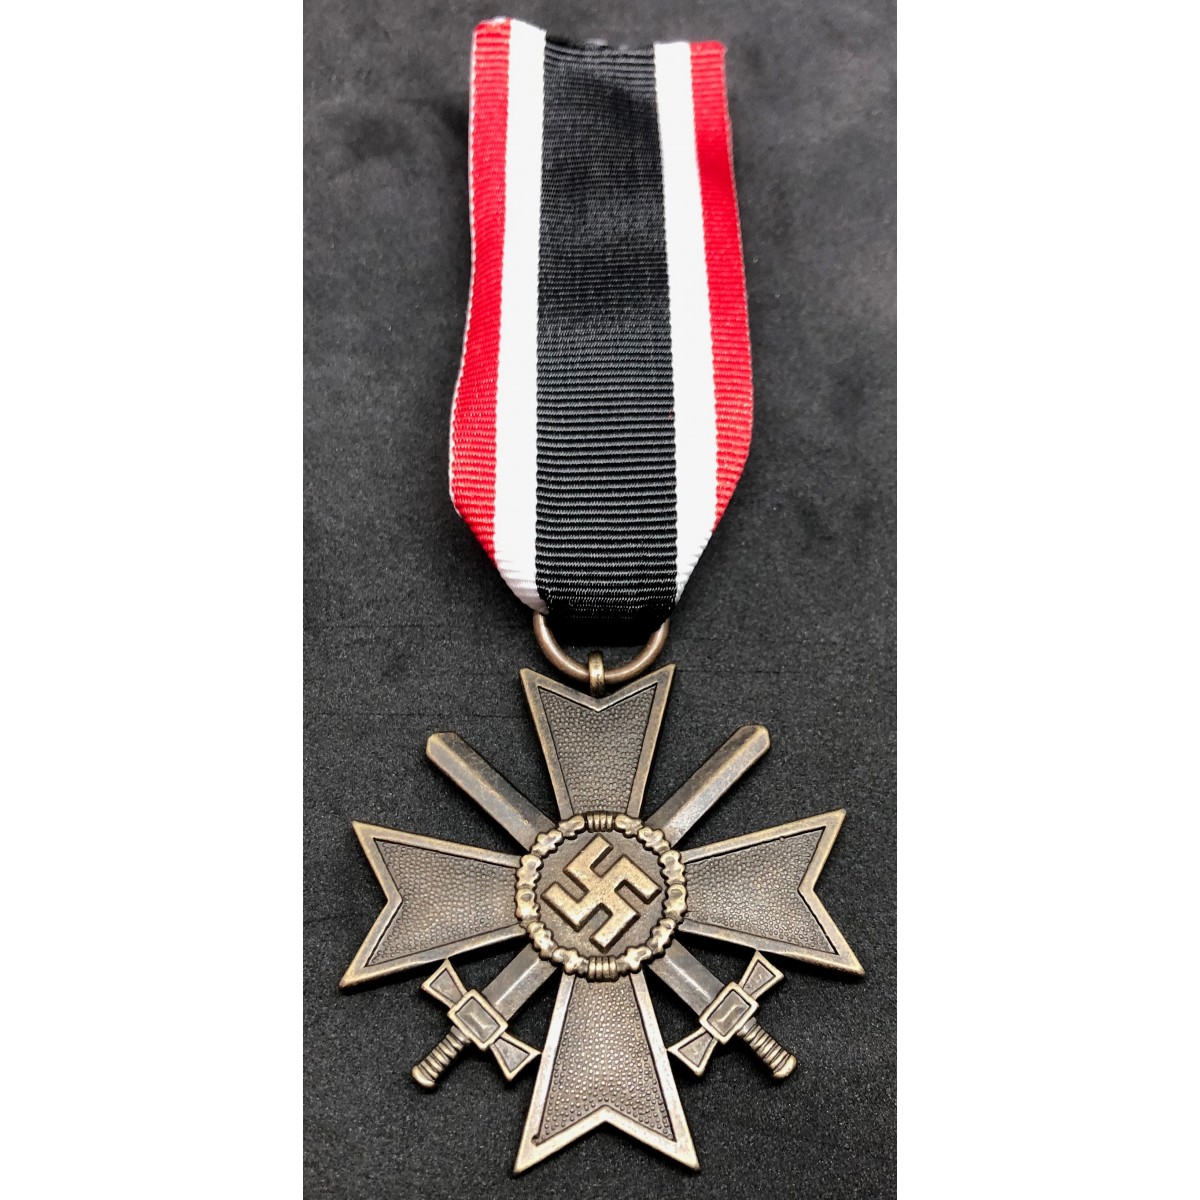 Details about   Italy Cross of War Merit 